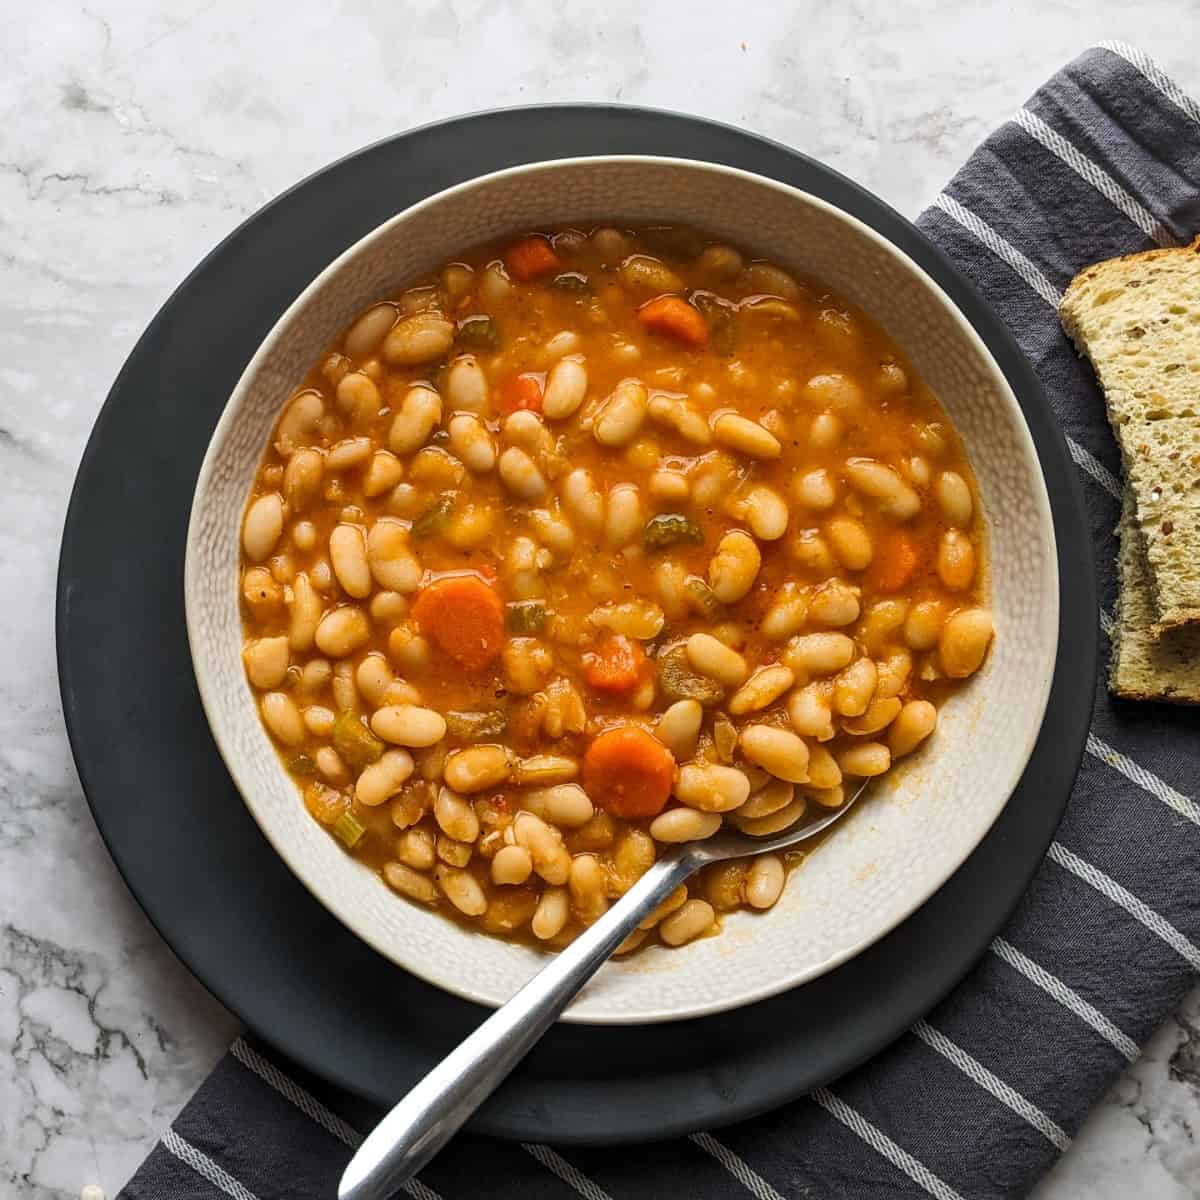 Greek white bean soup served on a bowl next to bread and vegetables.